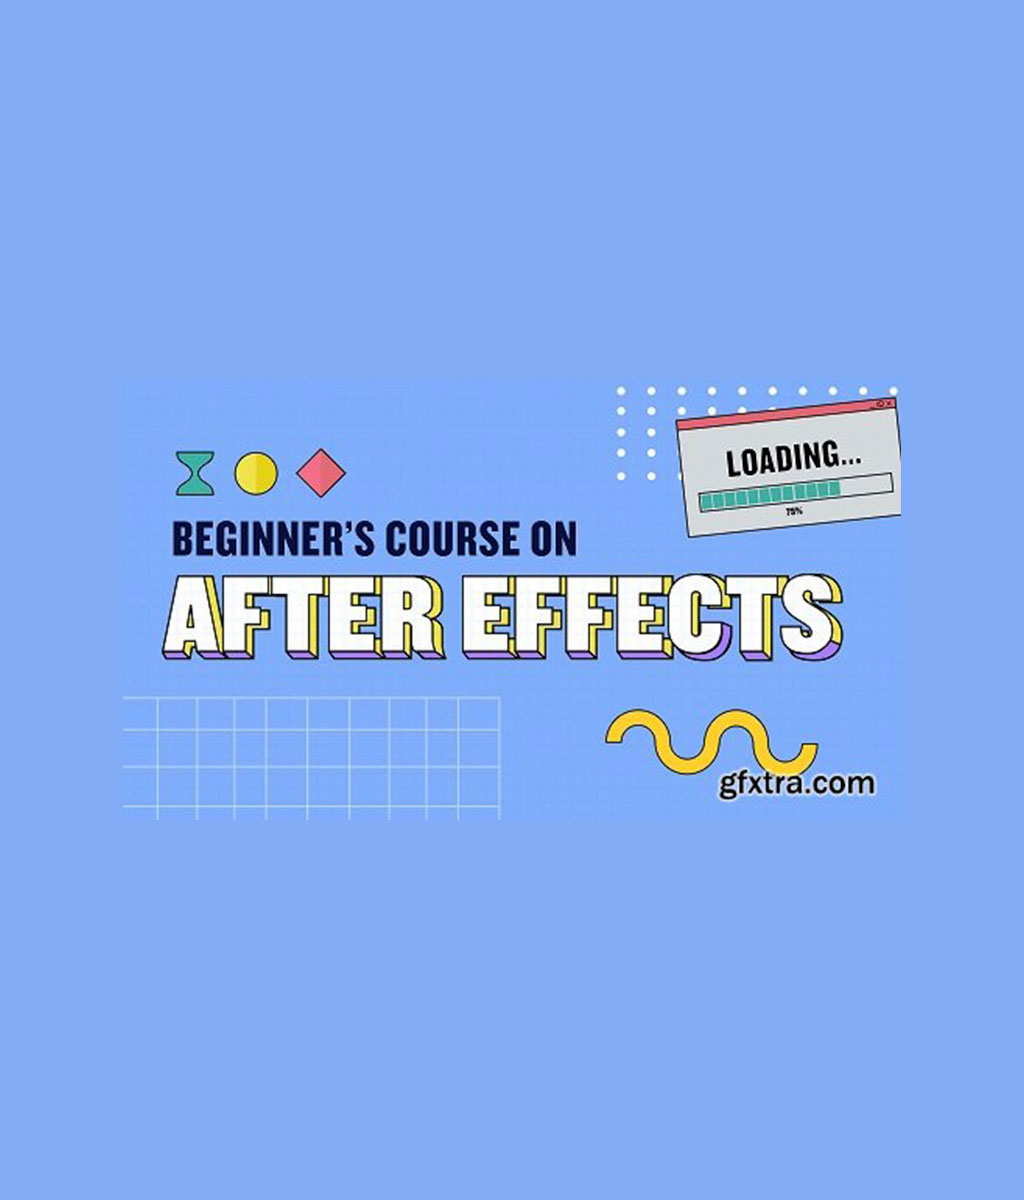 Adobe After Effects 2022: Learn Motion Graphics